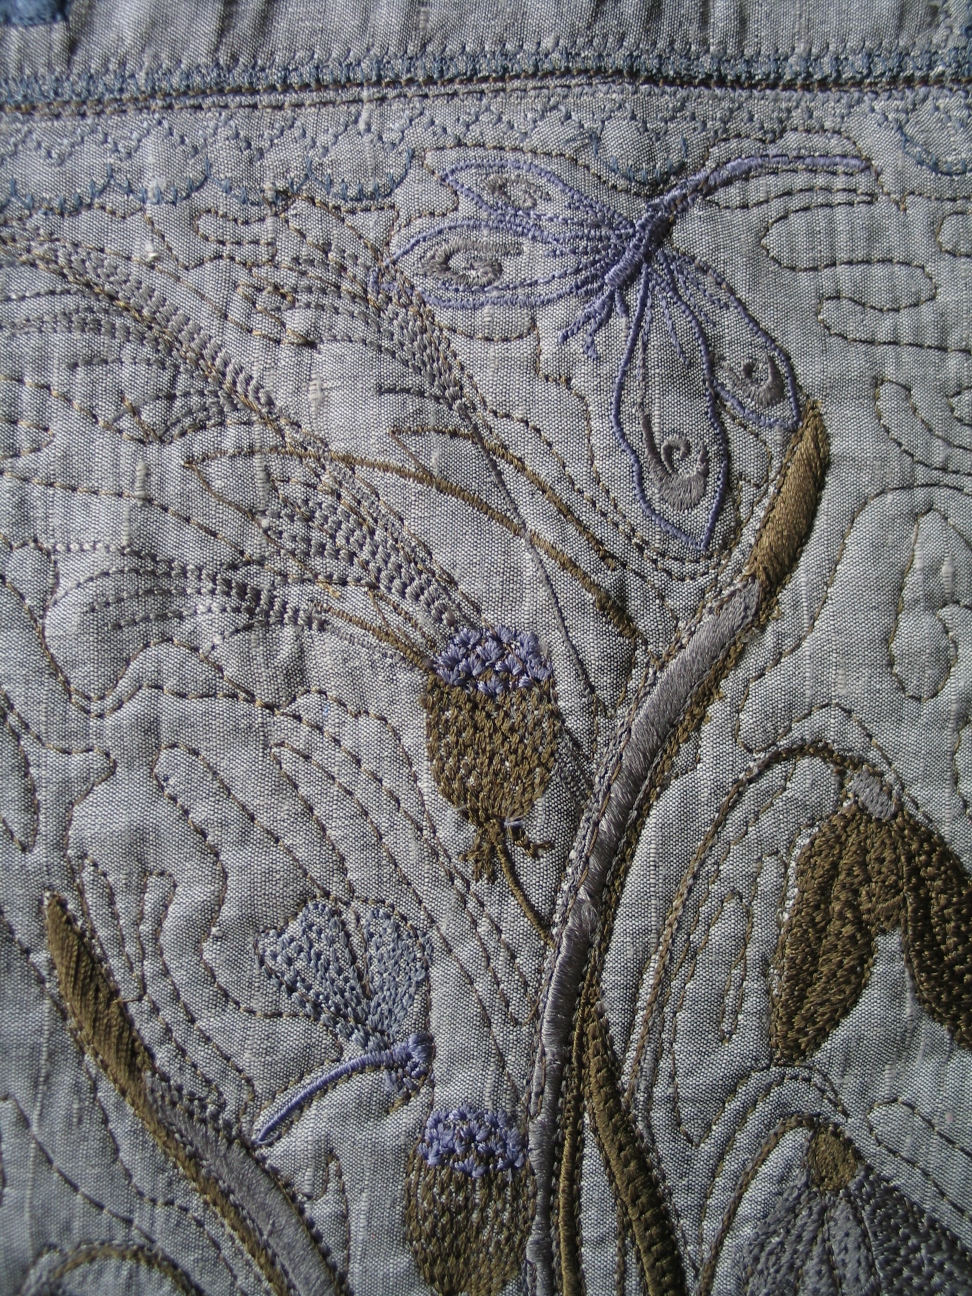 egyptian-galanthus-marsh-plants-embroidery-stitchout-detail